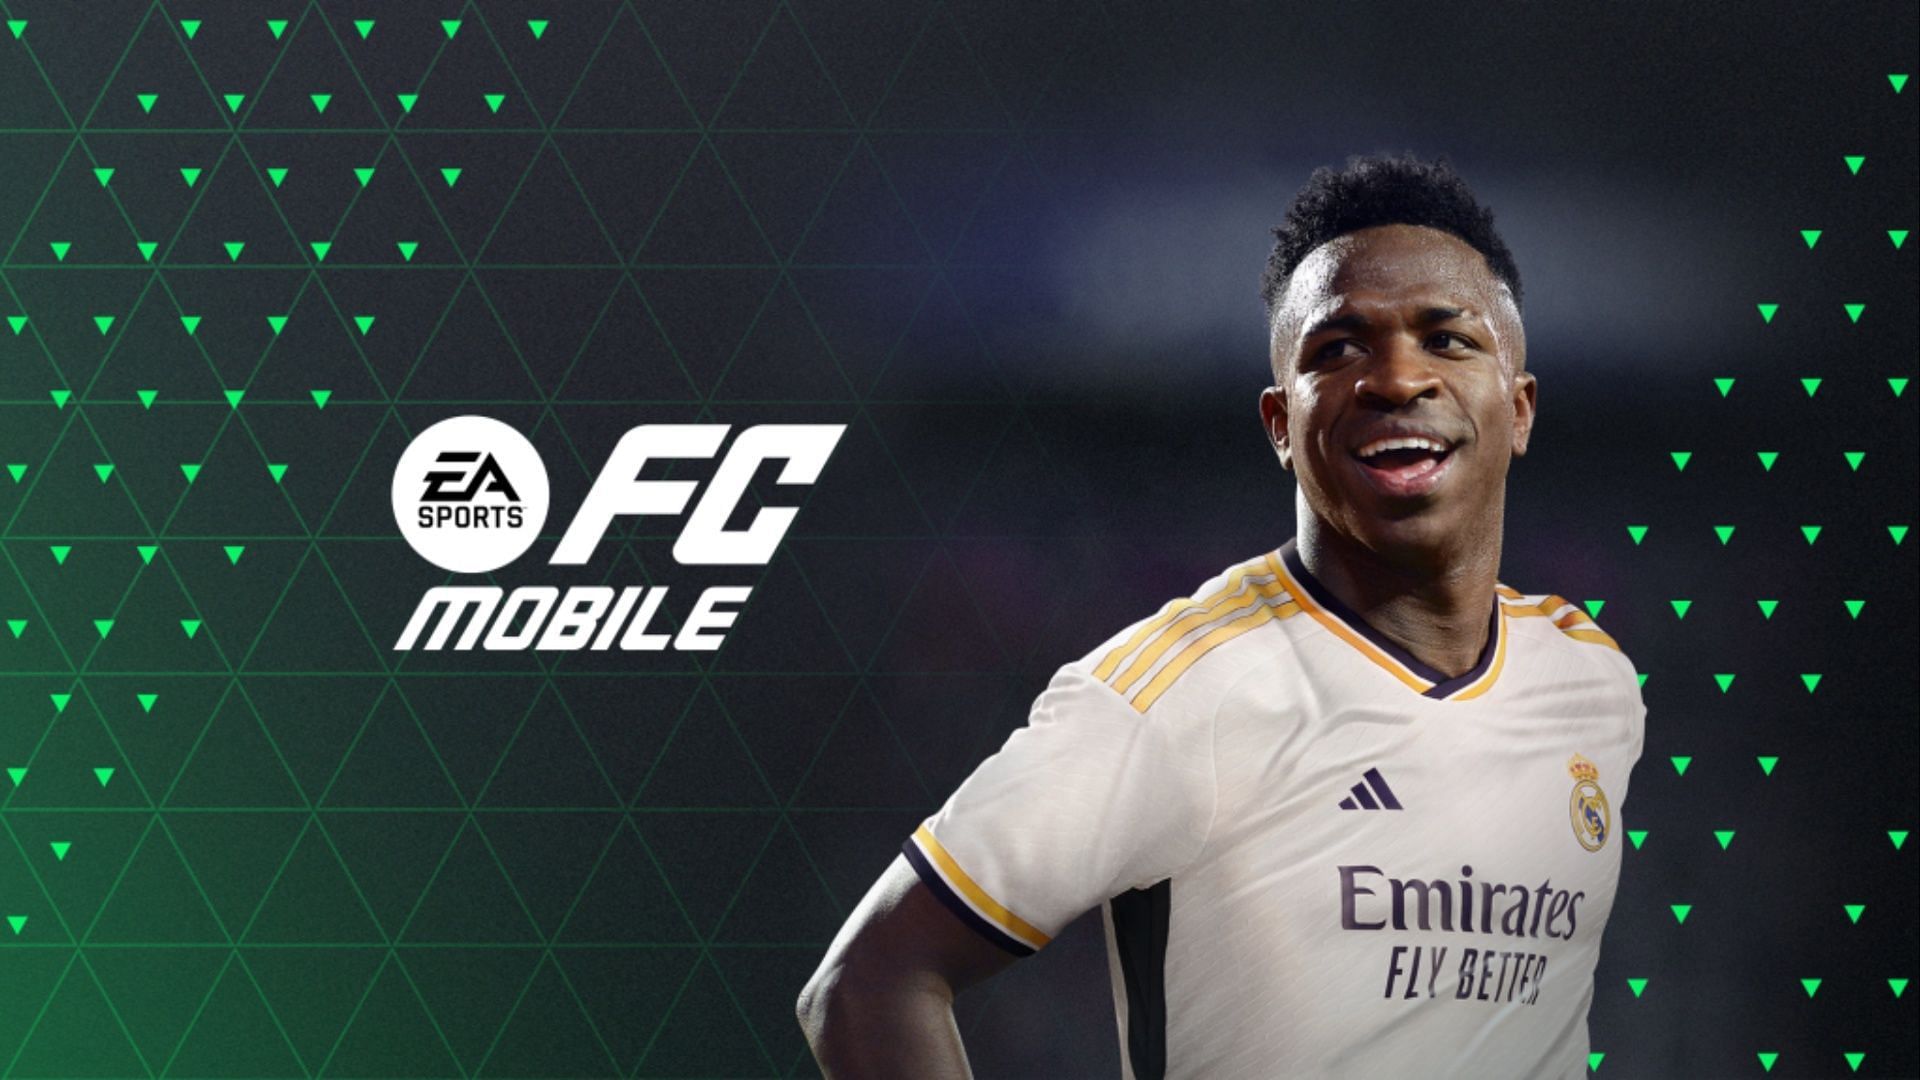 FC Mobile 24 Beta - Release Date, Features, and How to Access It